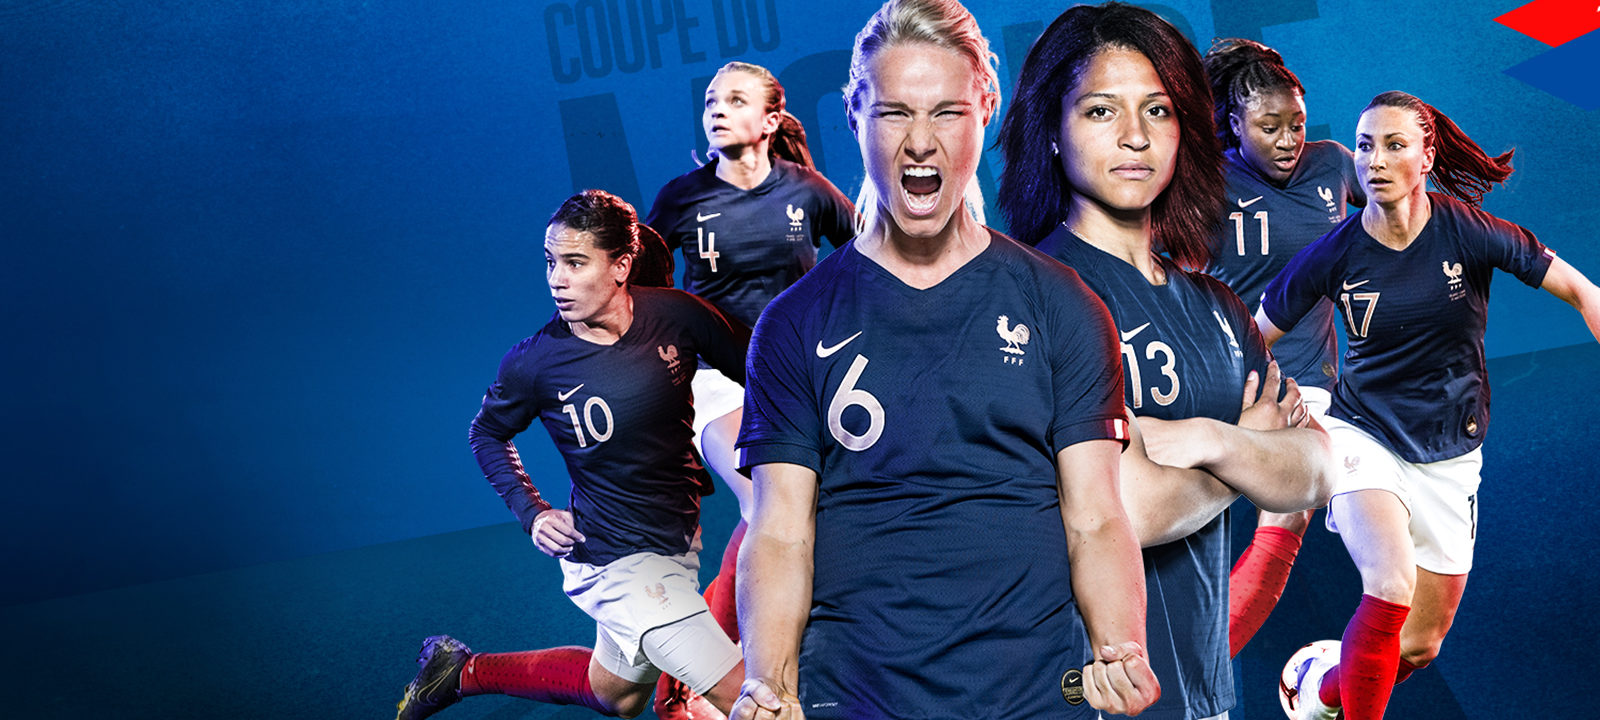 Ouverture_2_Projet_project_FFF_federation_francaise_football_french_federation_Coupe_du_Monde_Feminine_FIFA_France_2019_TM_world_cup_women